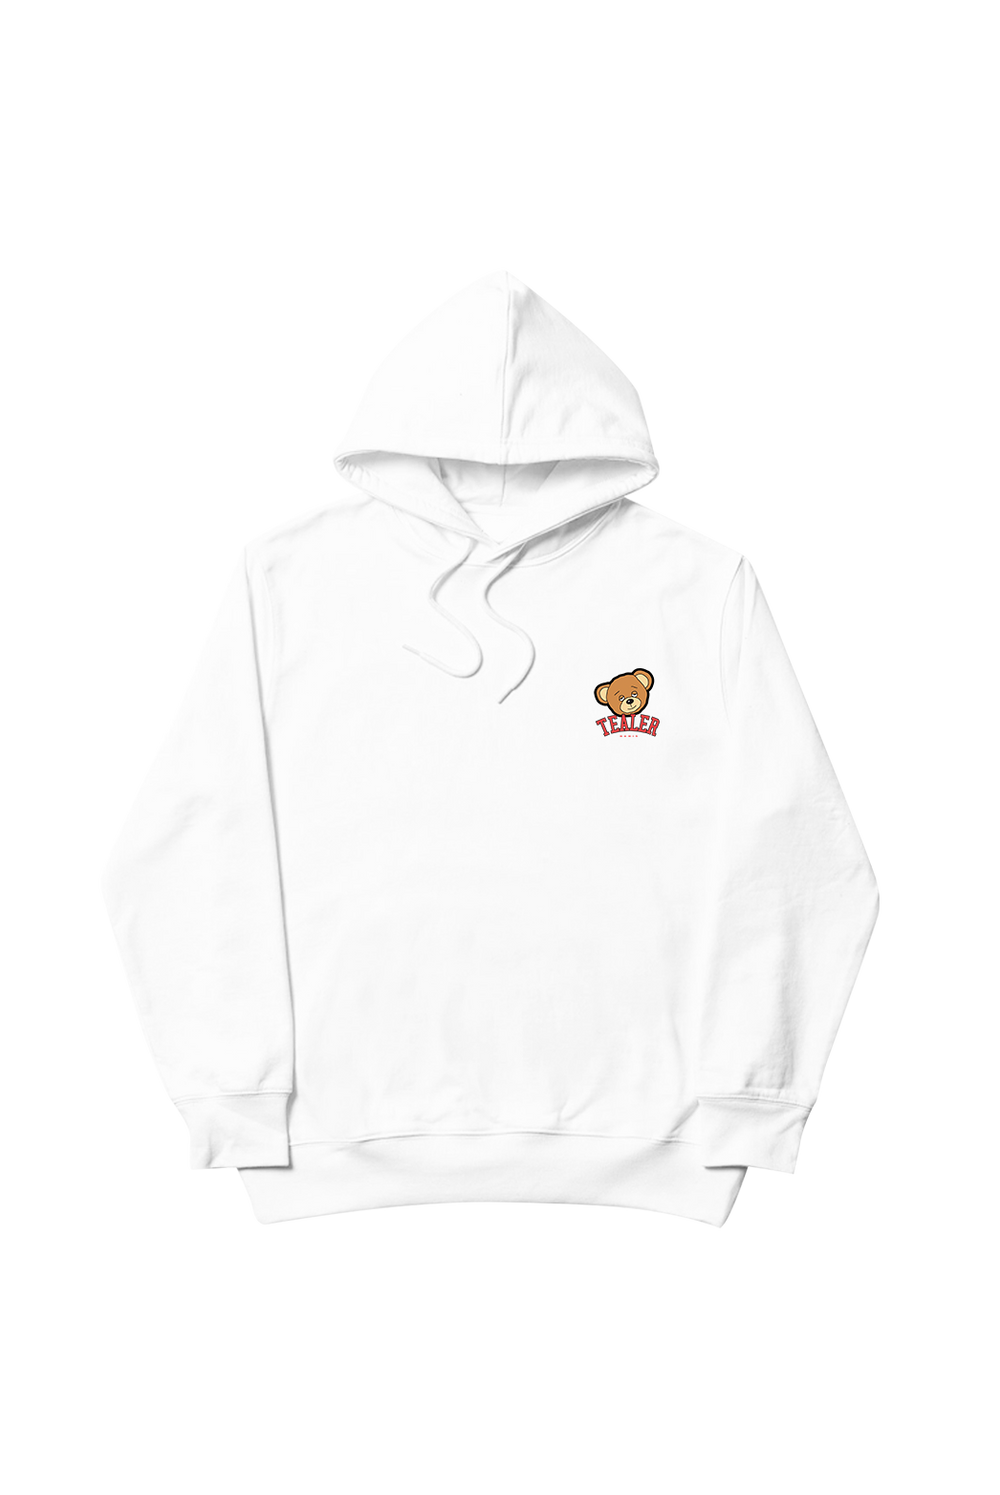 Tealer Bear Nounours ours, Hoodie White